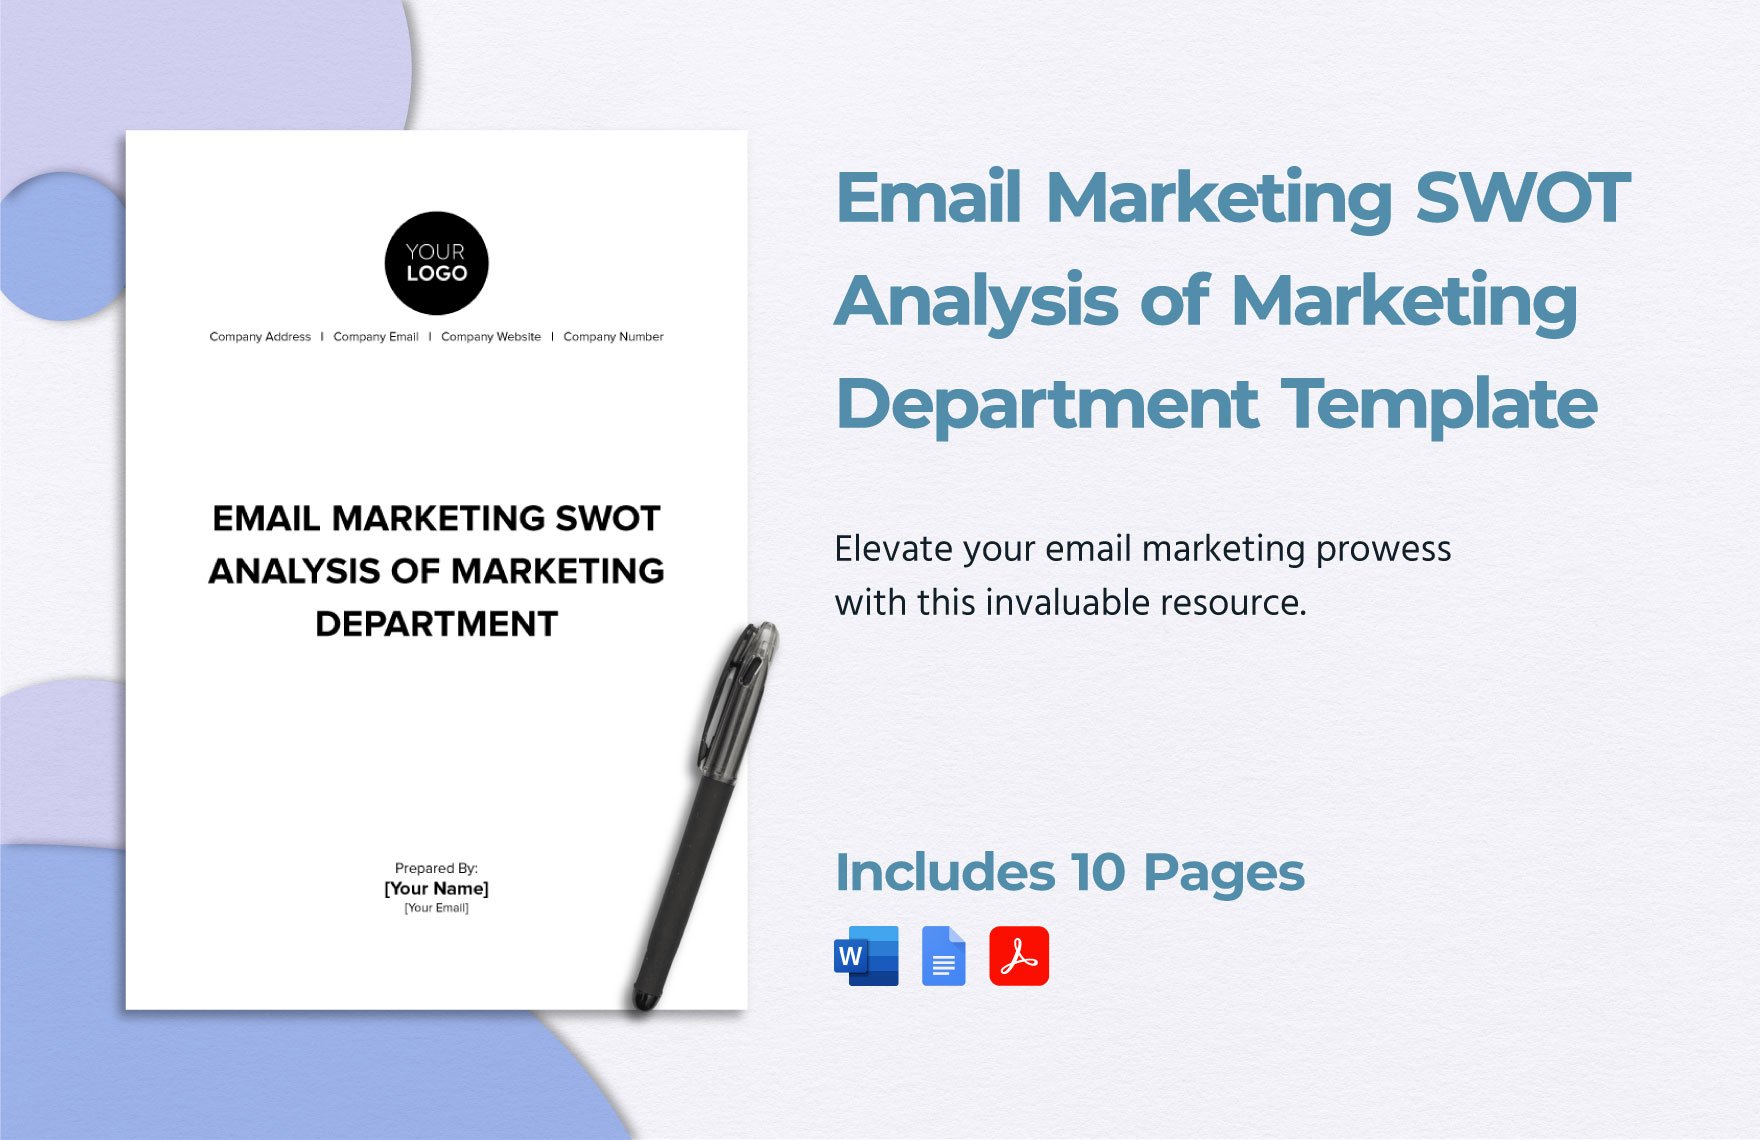 Email Marketing SWOT Analysis of Marketing Department Template